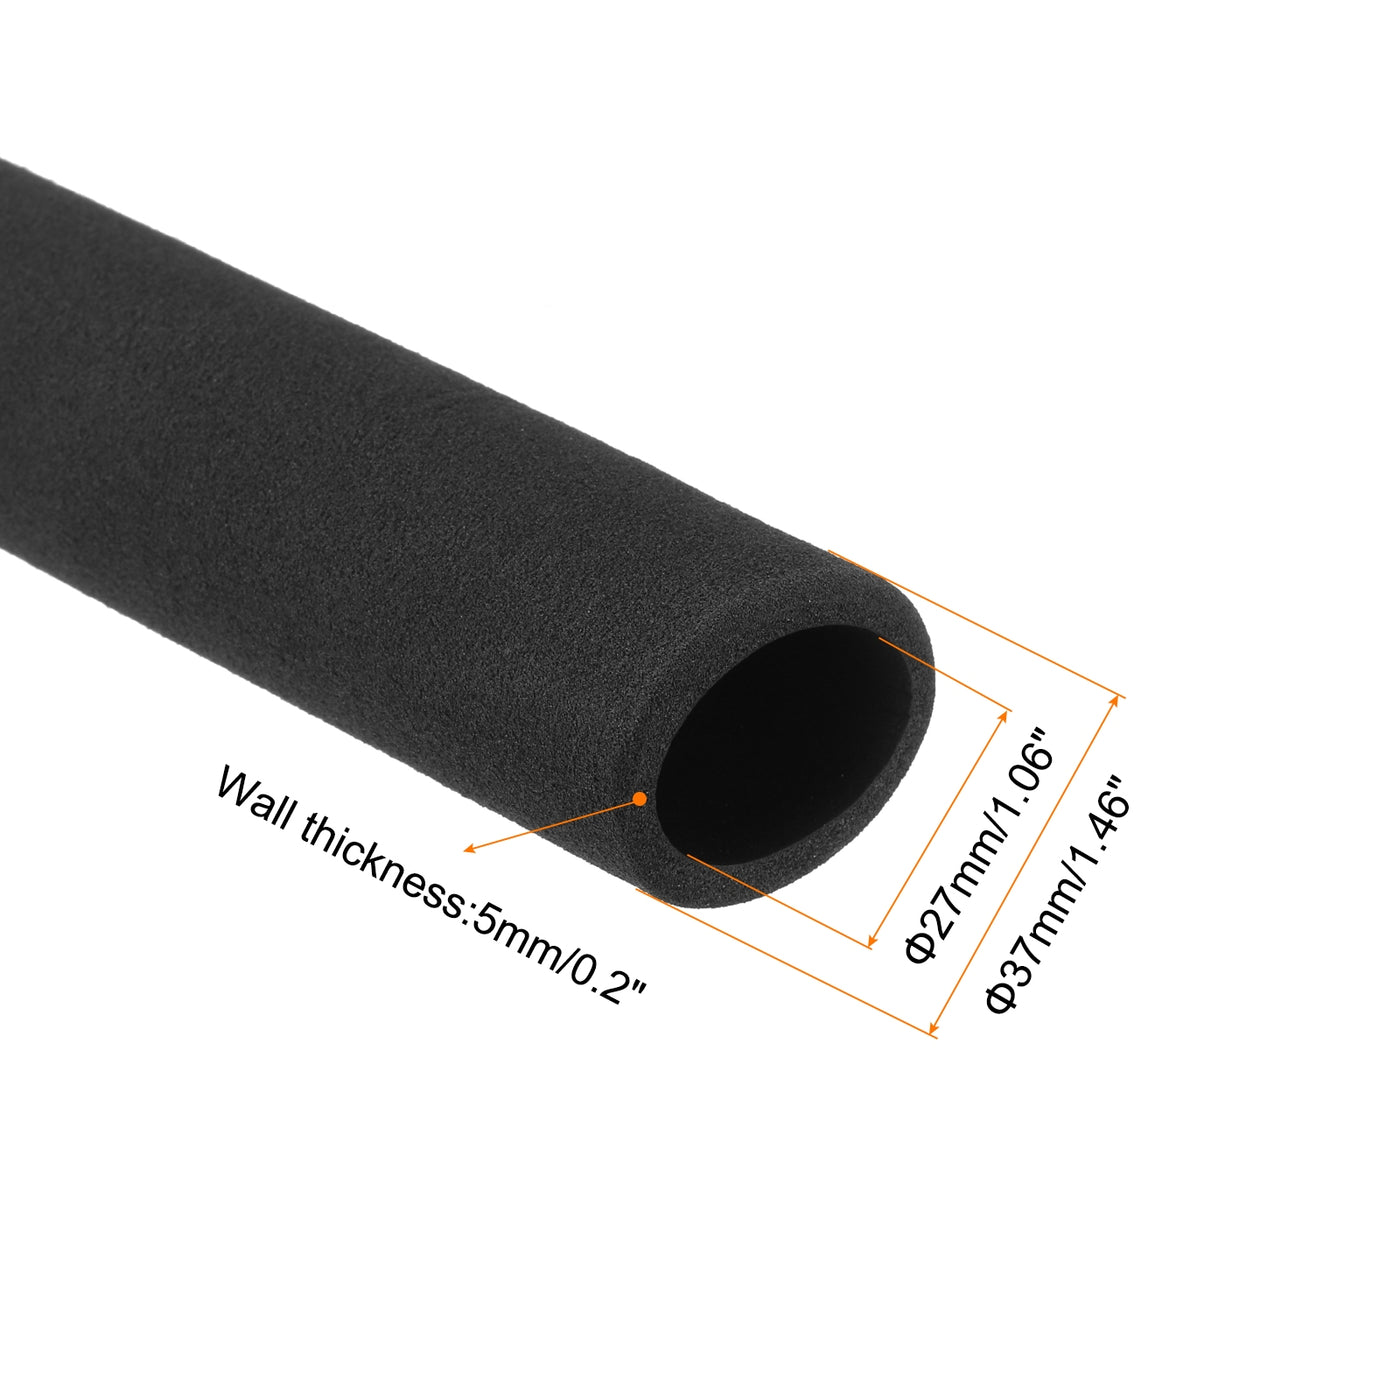 uxcell Uxcell Pipe Insulation Tube Foam Tubing for Handle Grip Support 27mm ID 37mm OD 390mm Heat Preservation Black 2pcs